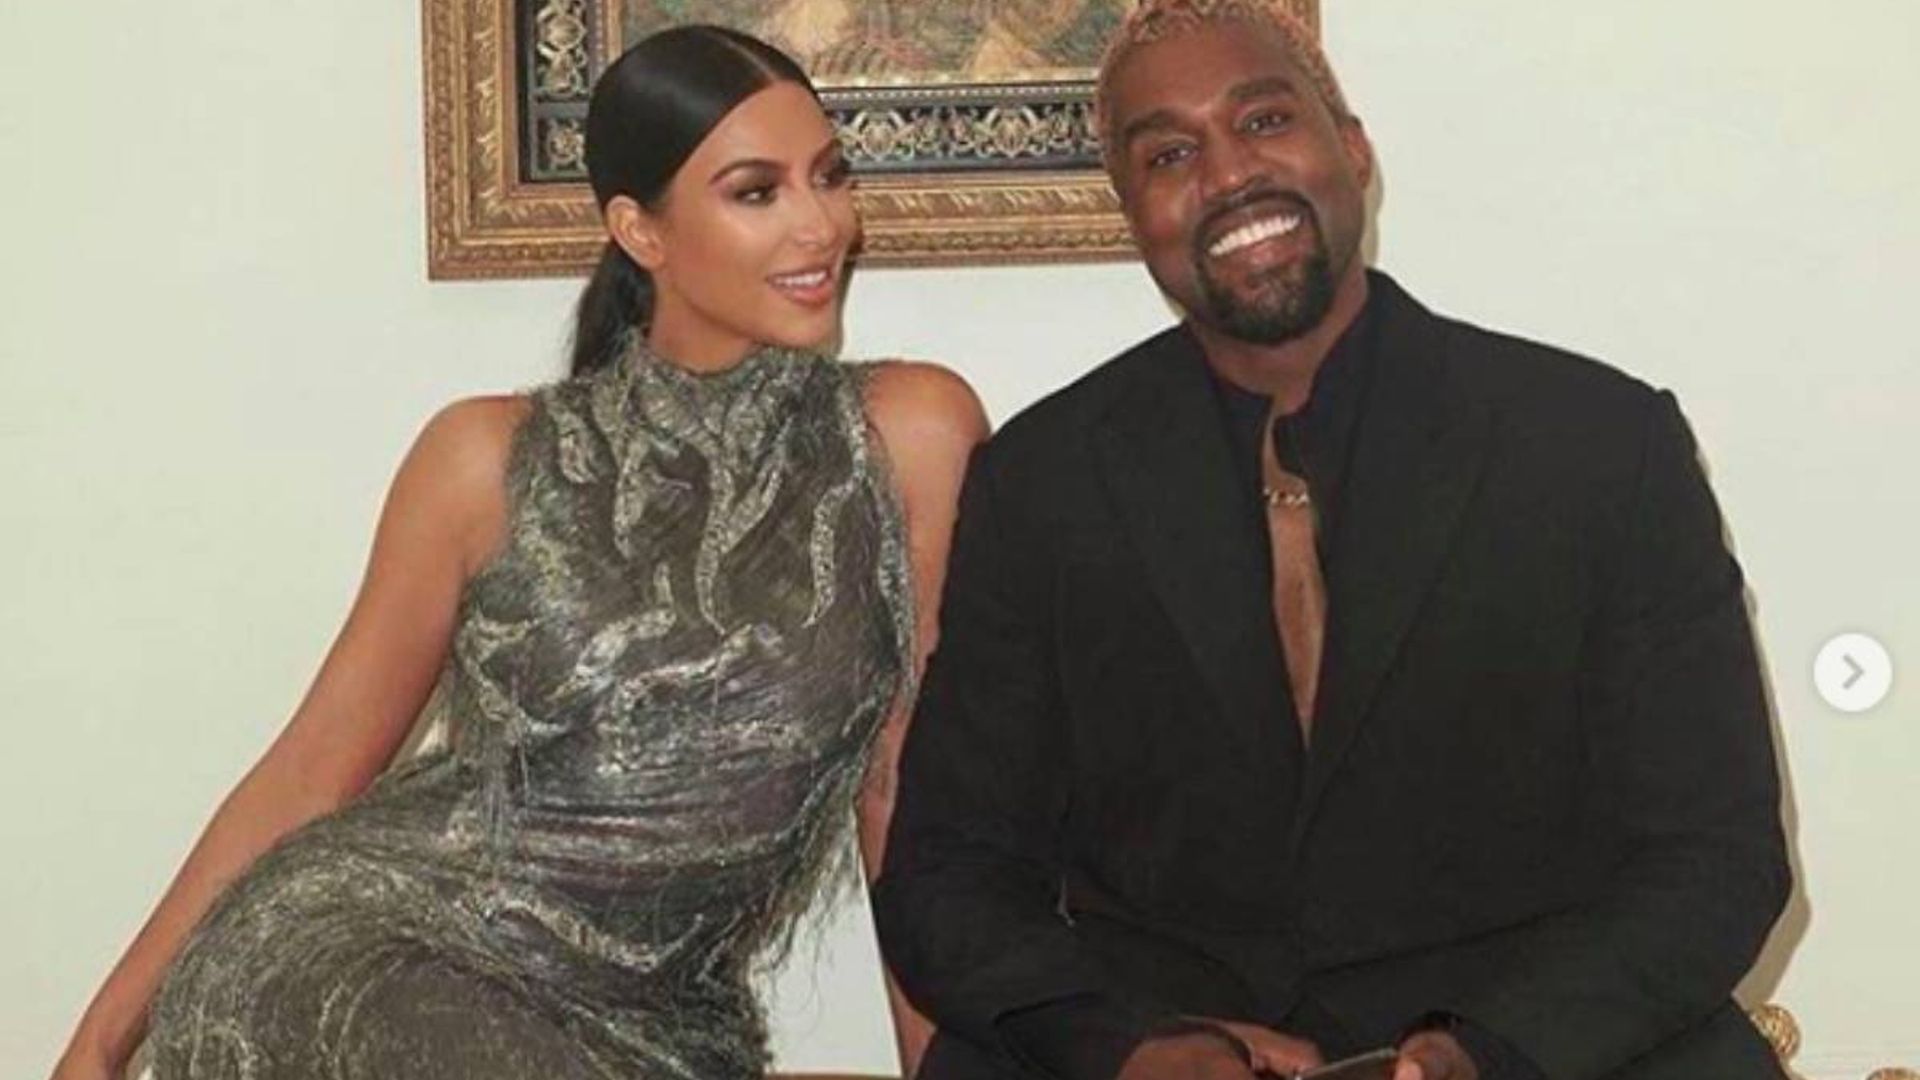 Kim Kardashian and Kanye West dote on daughters Chicago and North in adorable photo